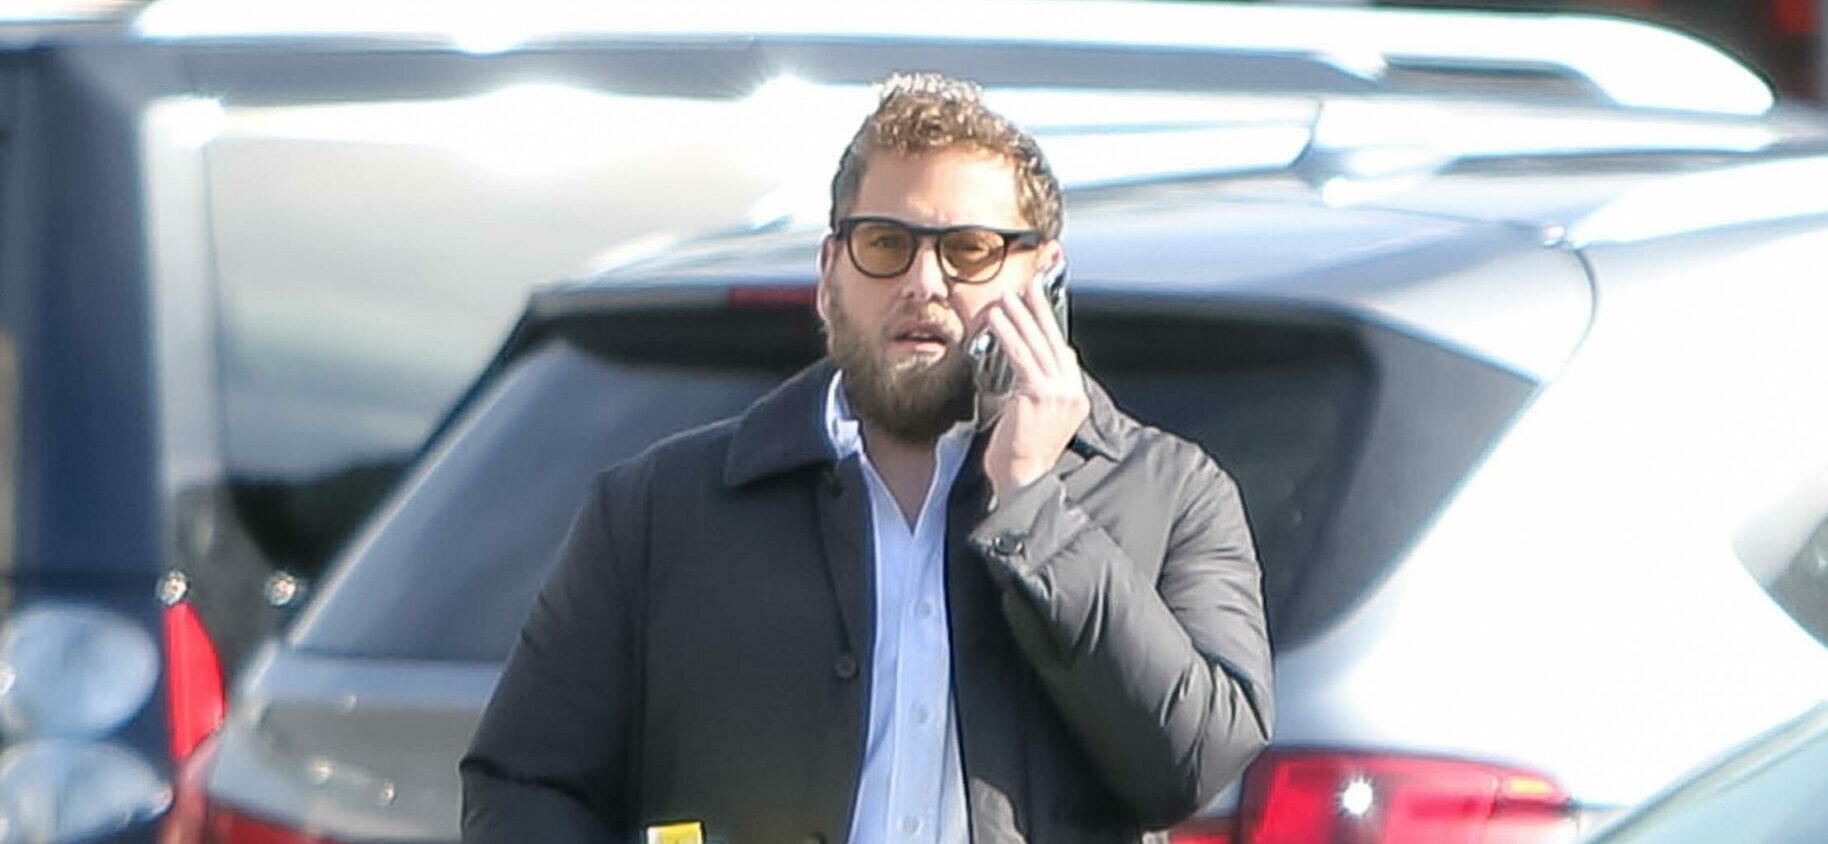 Jonah Hill out and about